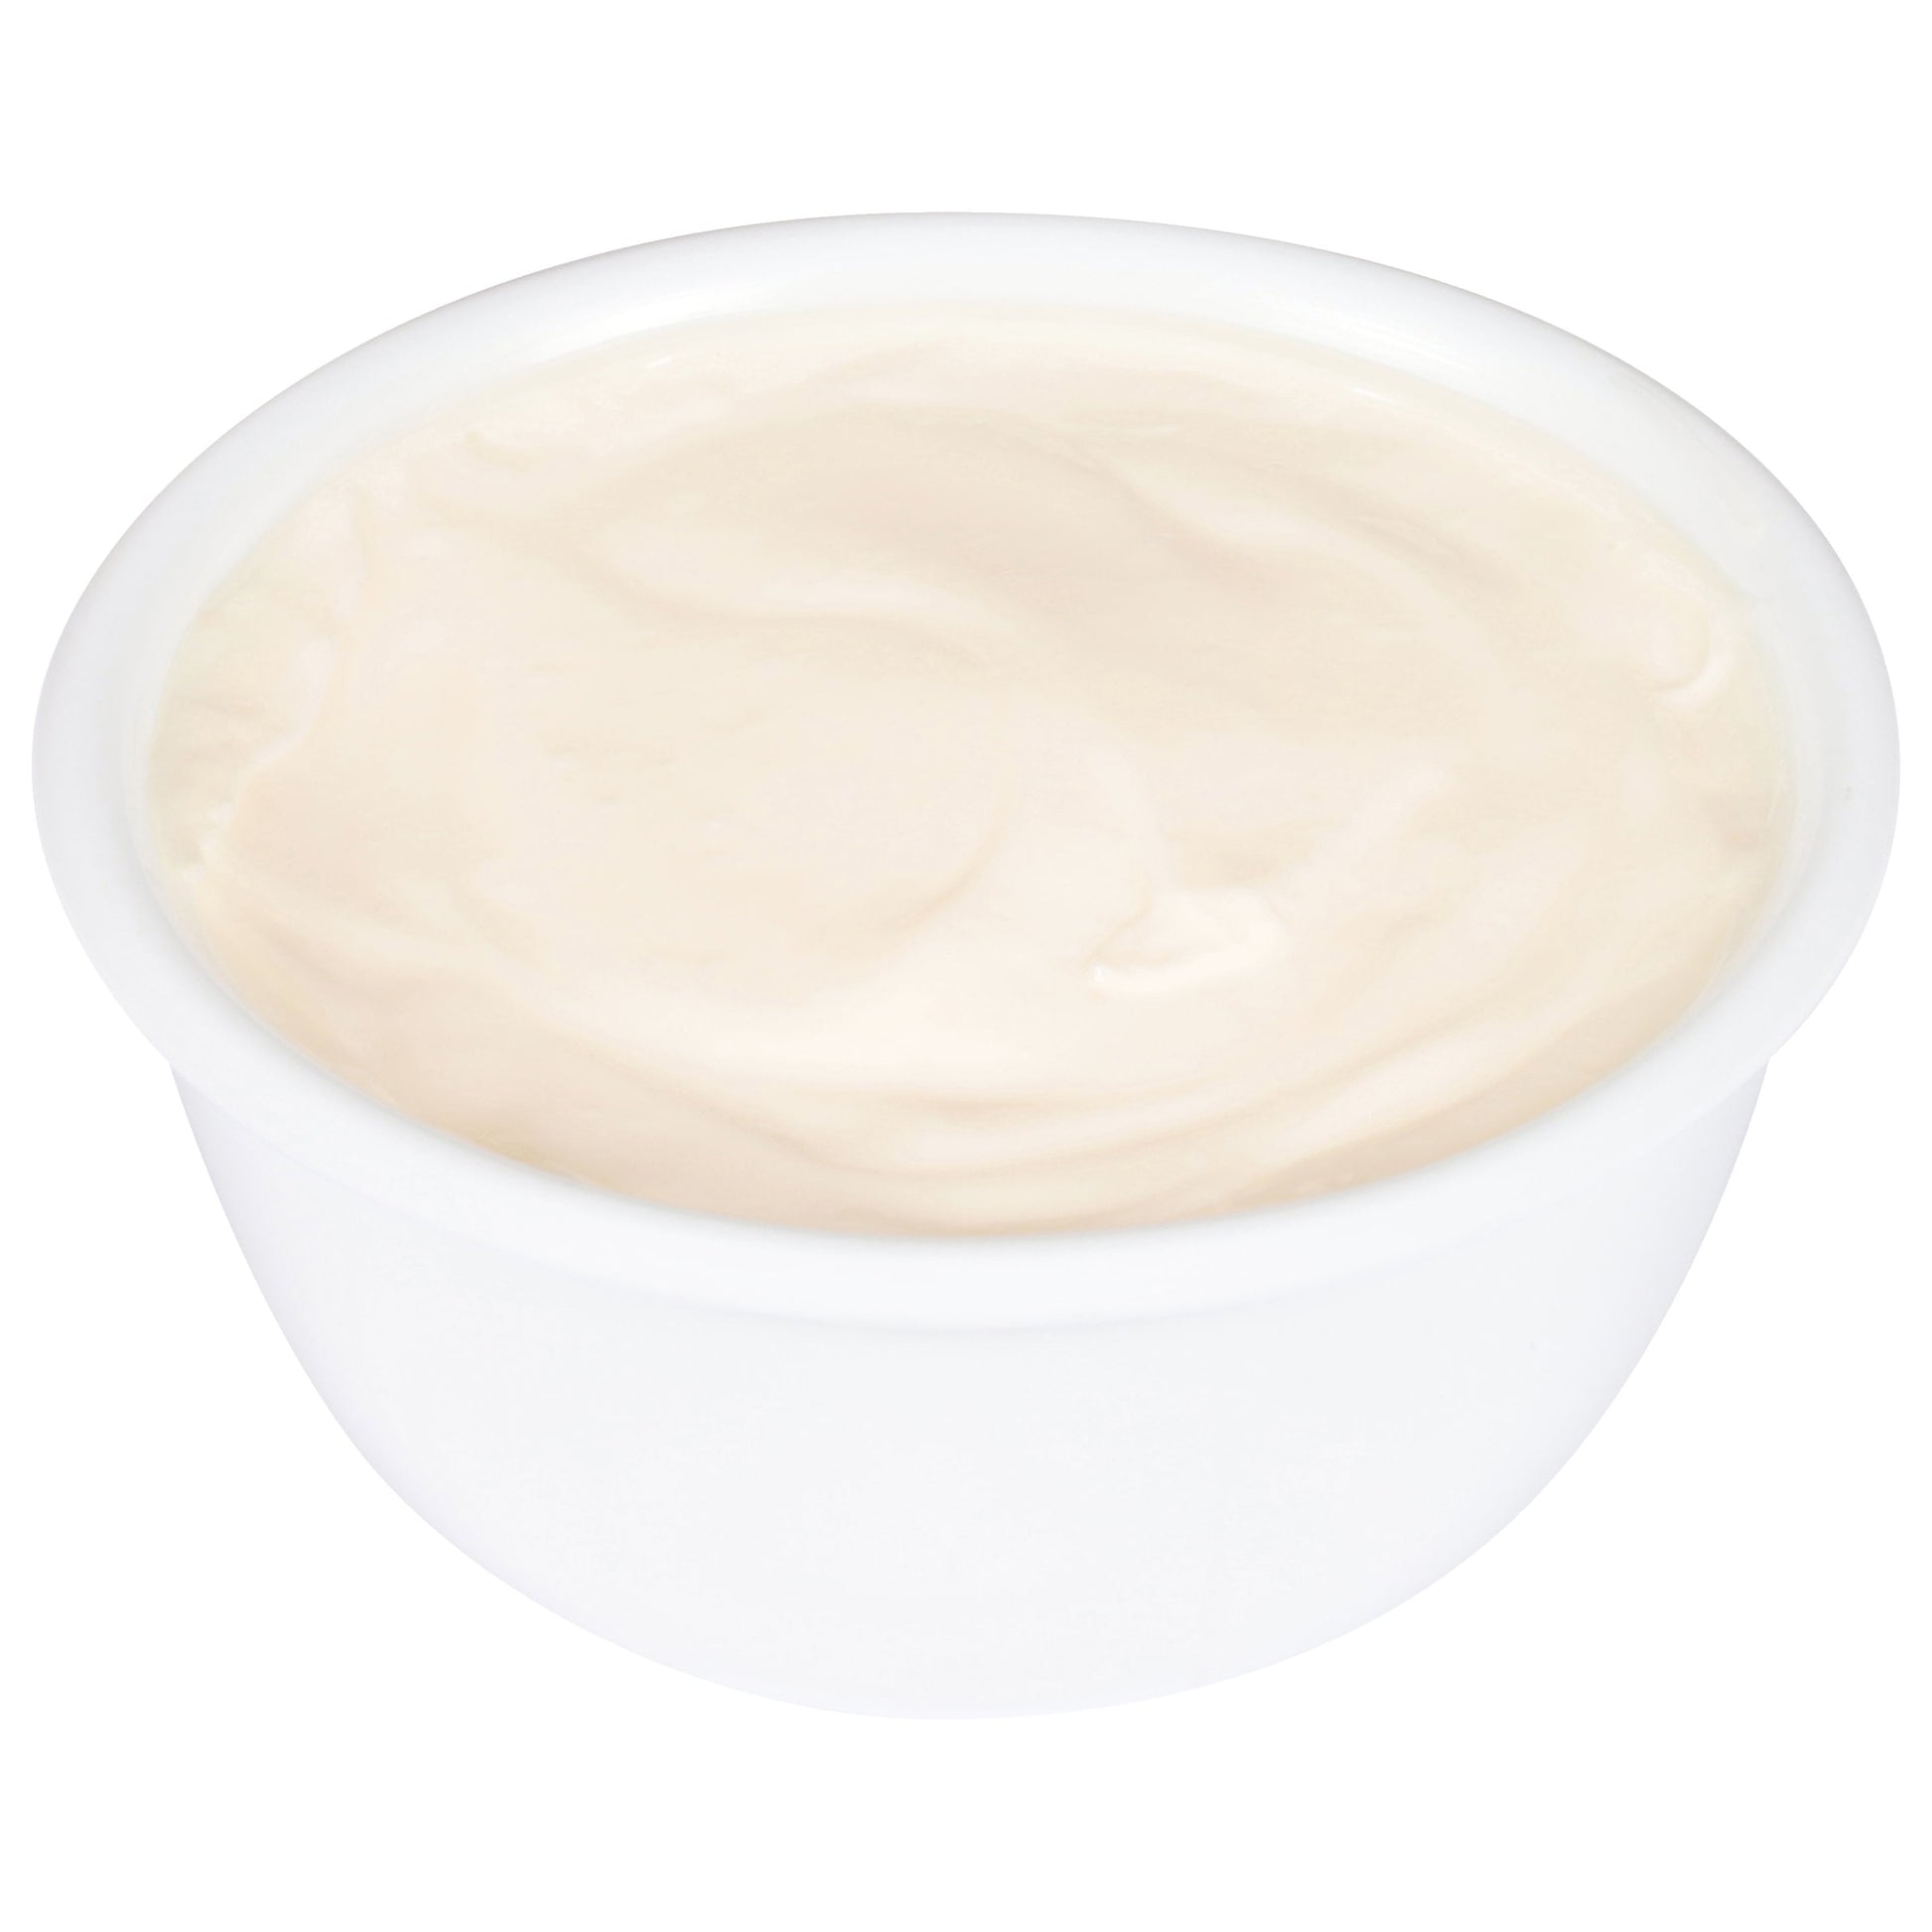 Single Serve Mayonnaise, 0.44 Oz. Packets (Pack of 200)